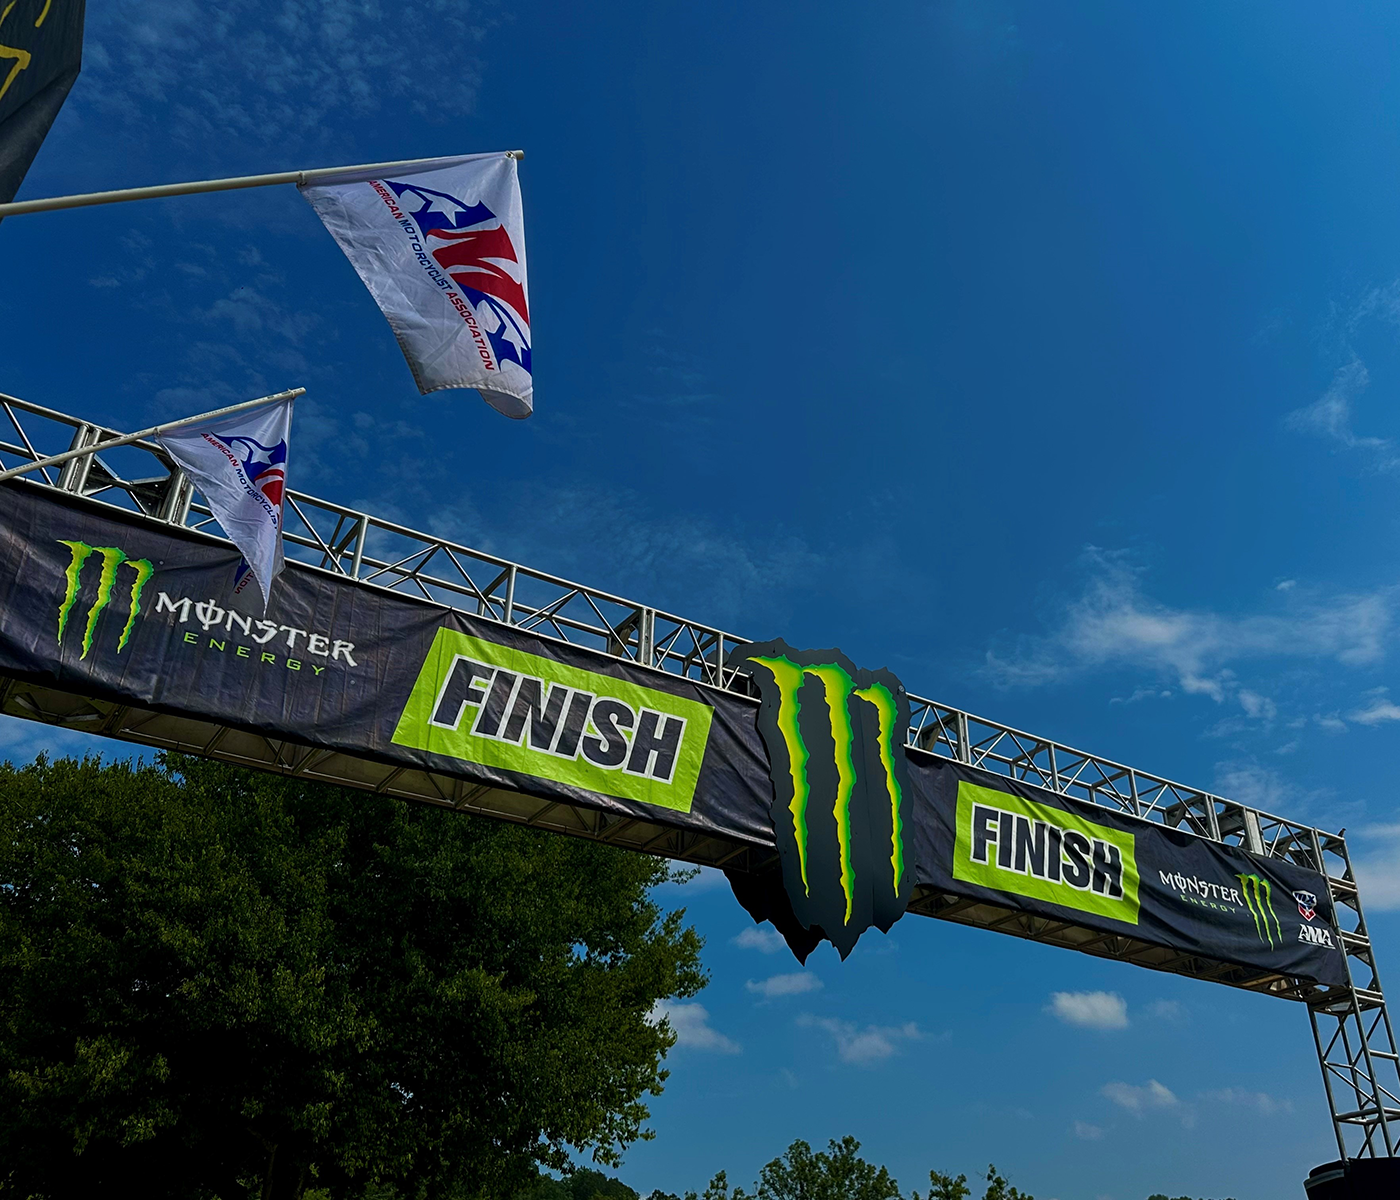 AMA Flags displayed at the finish line.